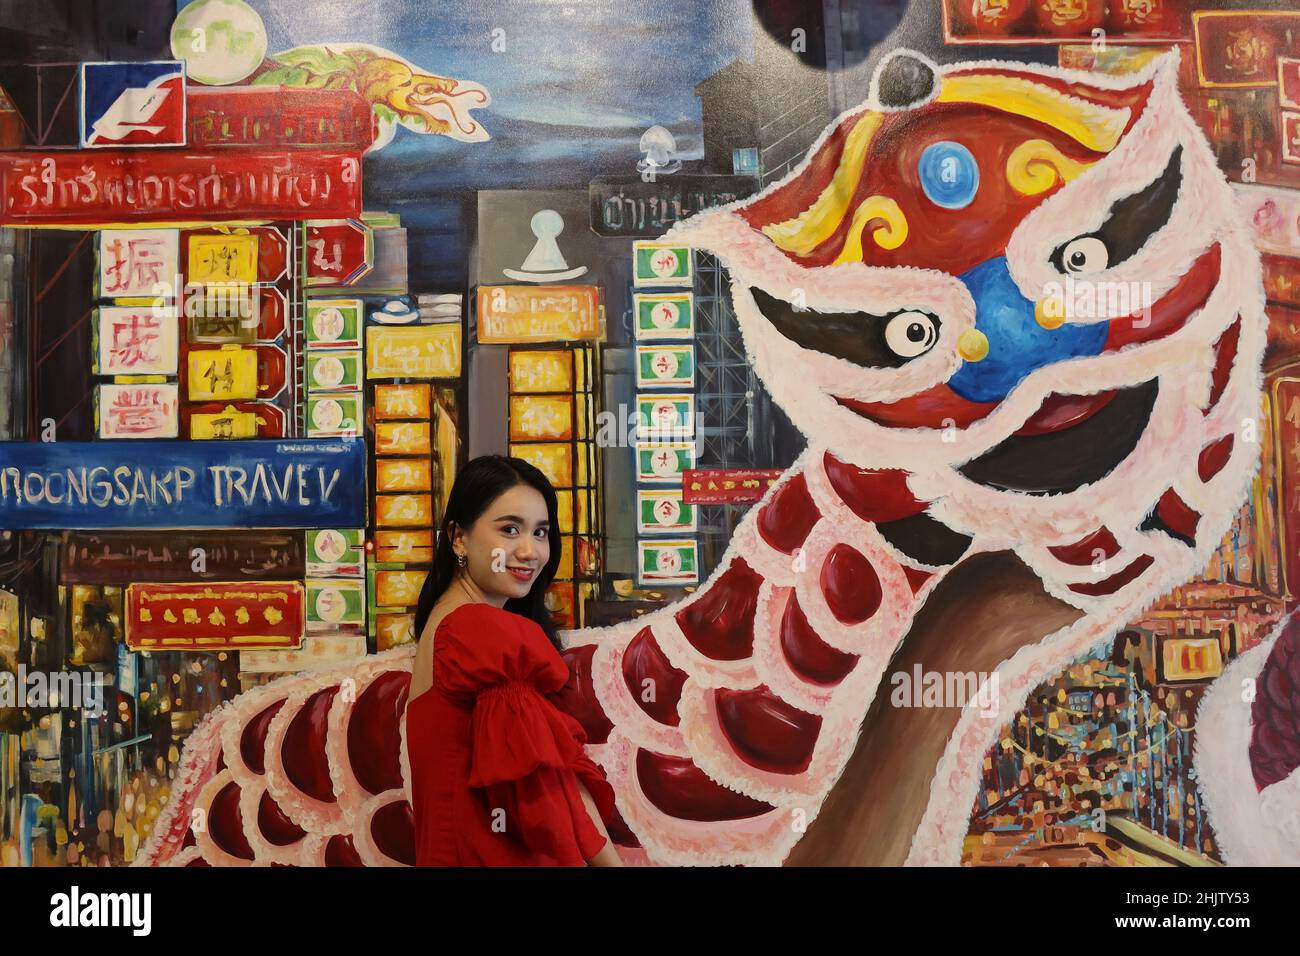 Thai woman smiling in front of a mural of Chinatown, Chinatown, Bangkok, Thailand Stock Photo